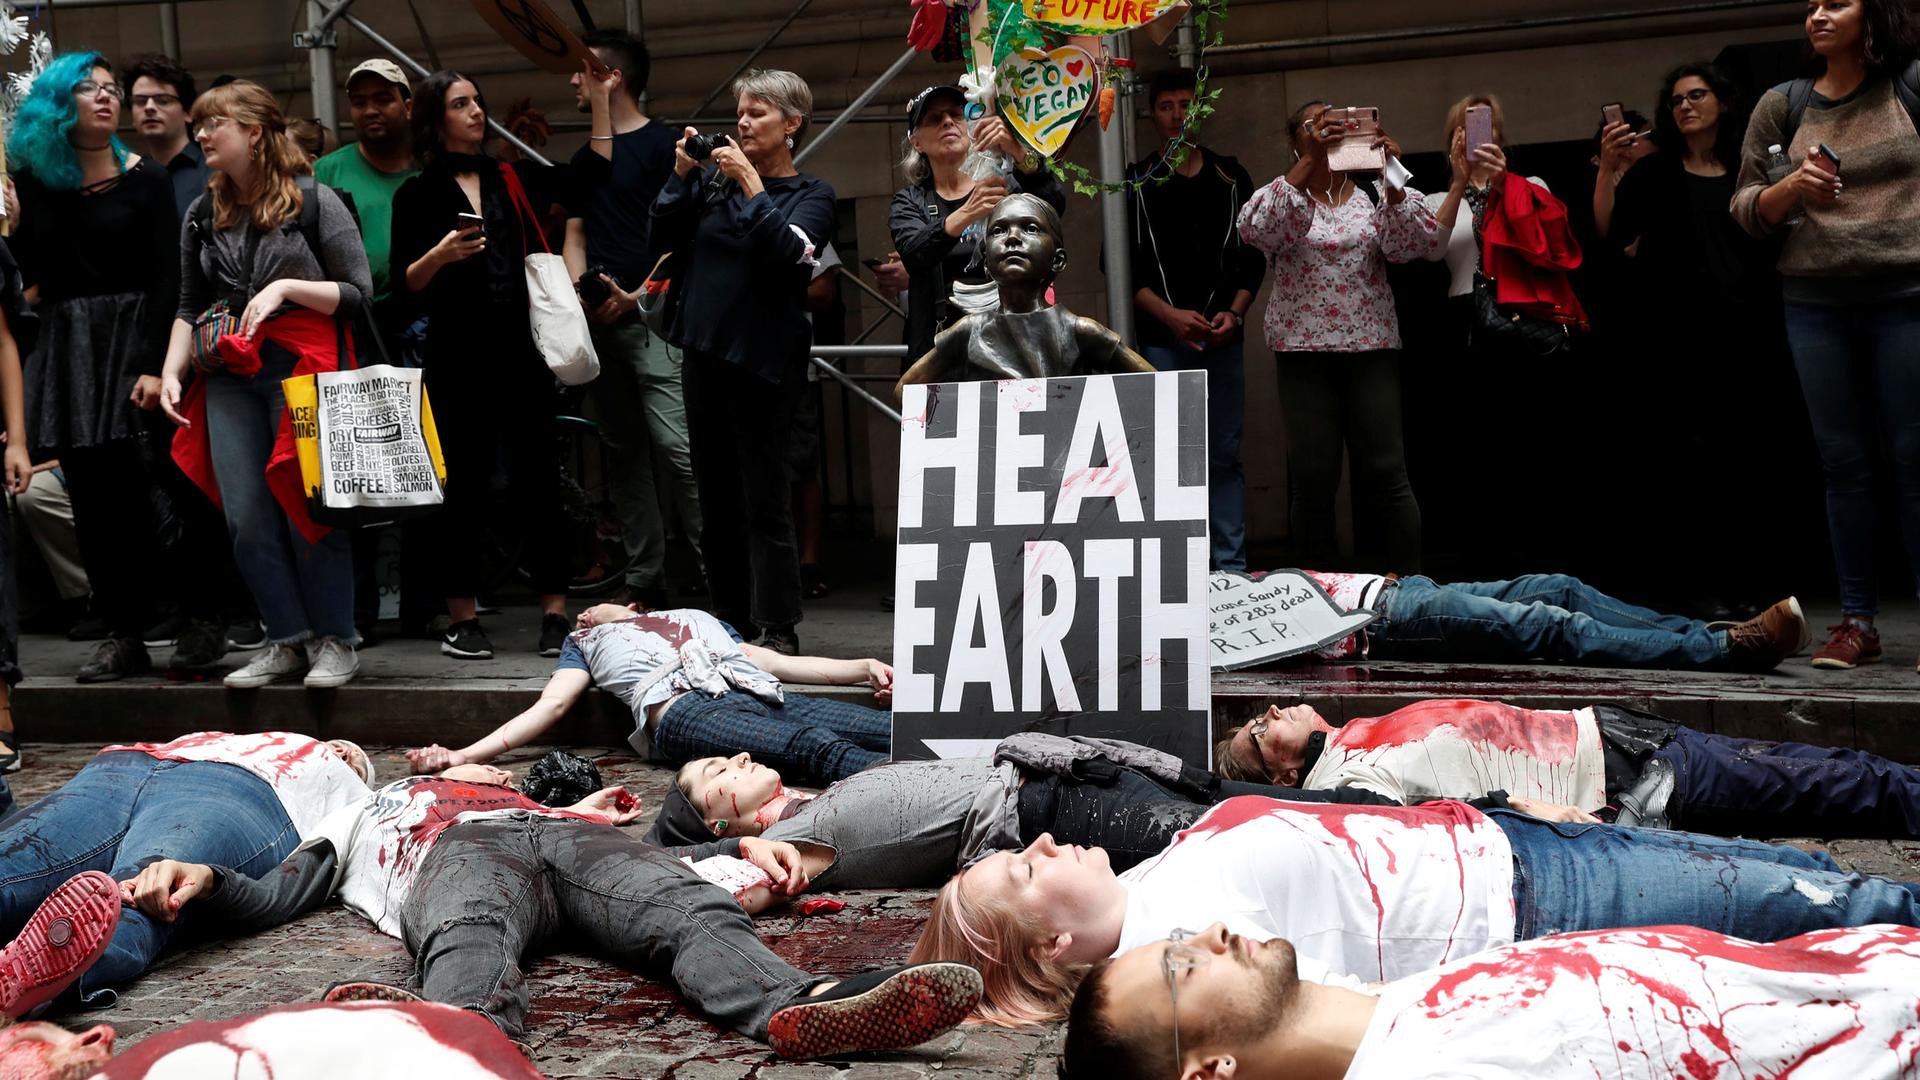 Climate change activists protest at the Wall Street Bull in Lower Manhattan during Extinction Rebellion protests in New York City, New York, US, on Oct. 7, 2019.